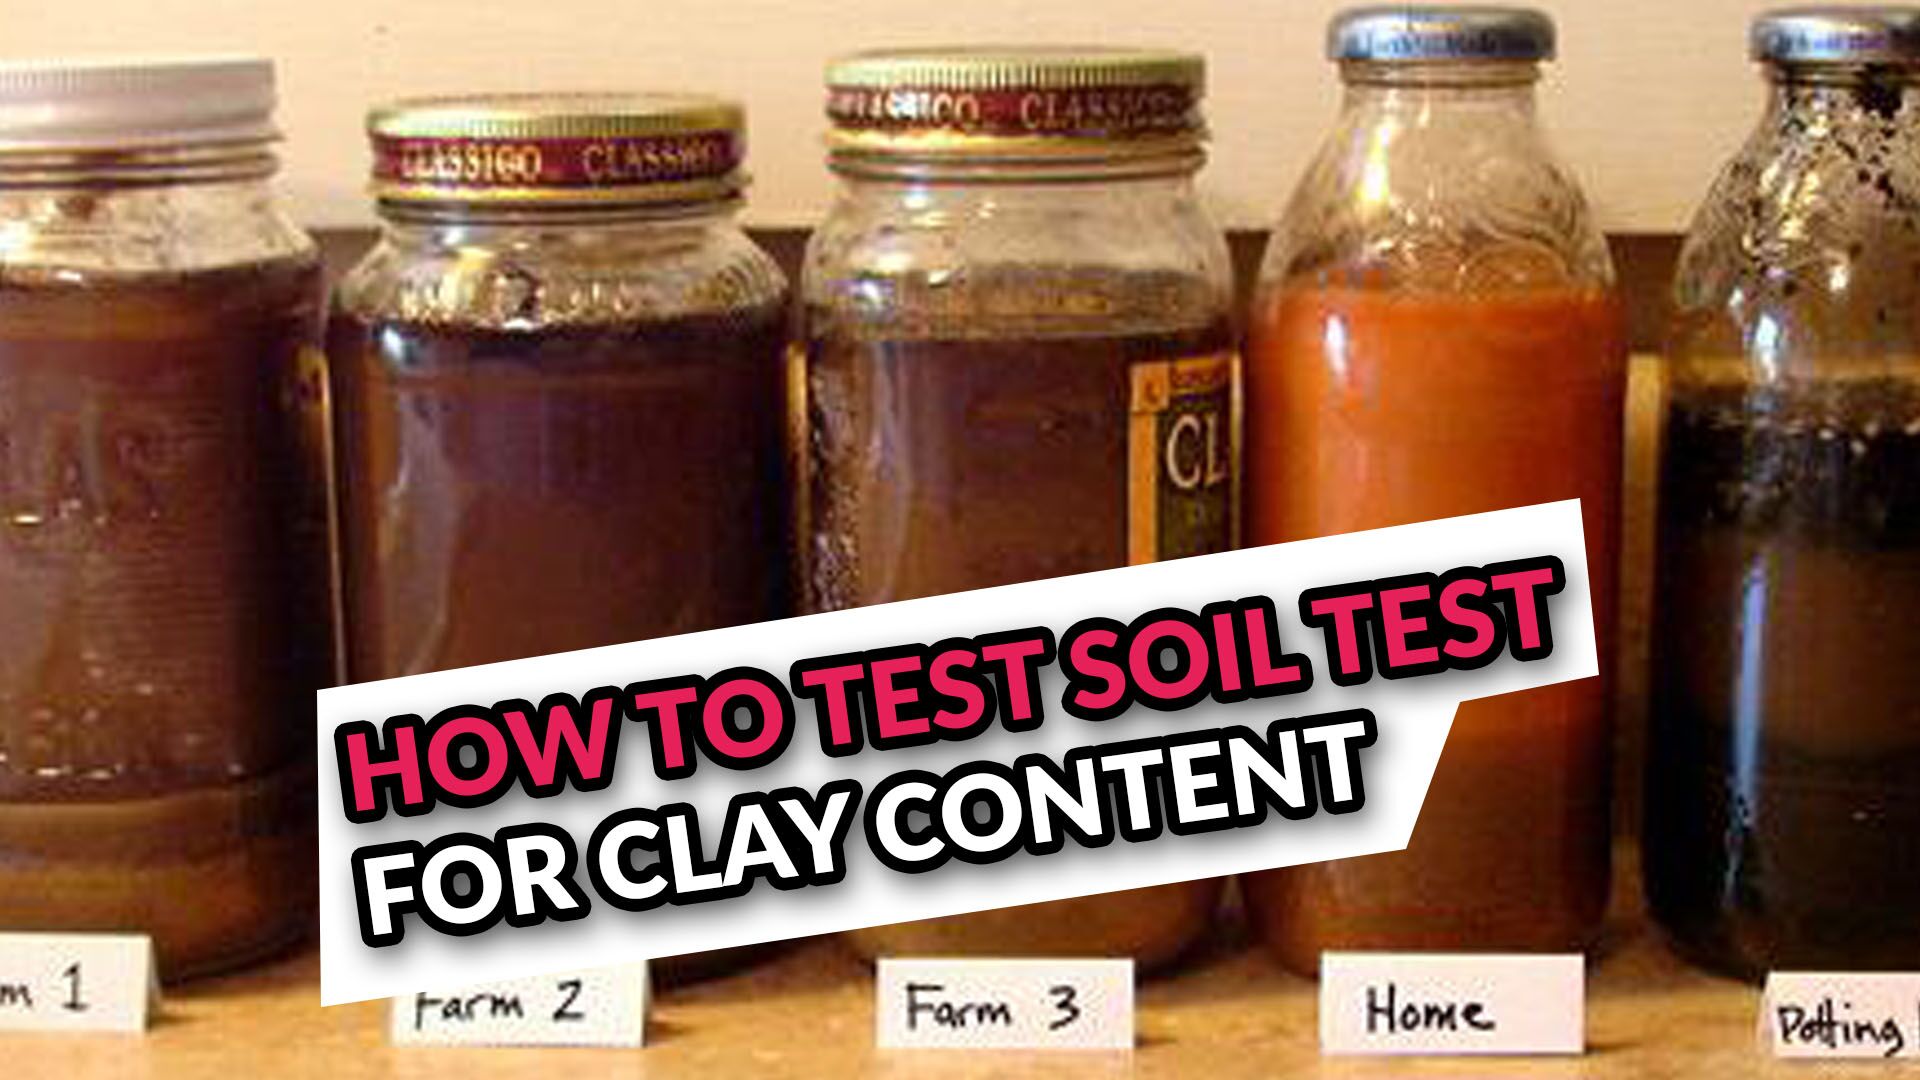 How to Test Soil Test For Clay Content